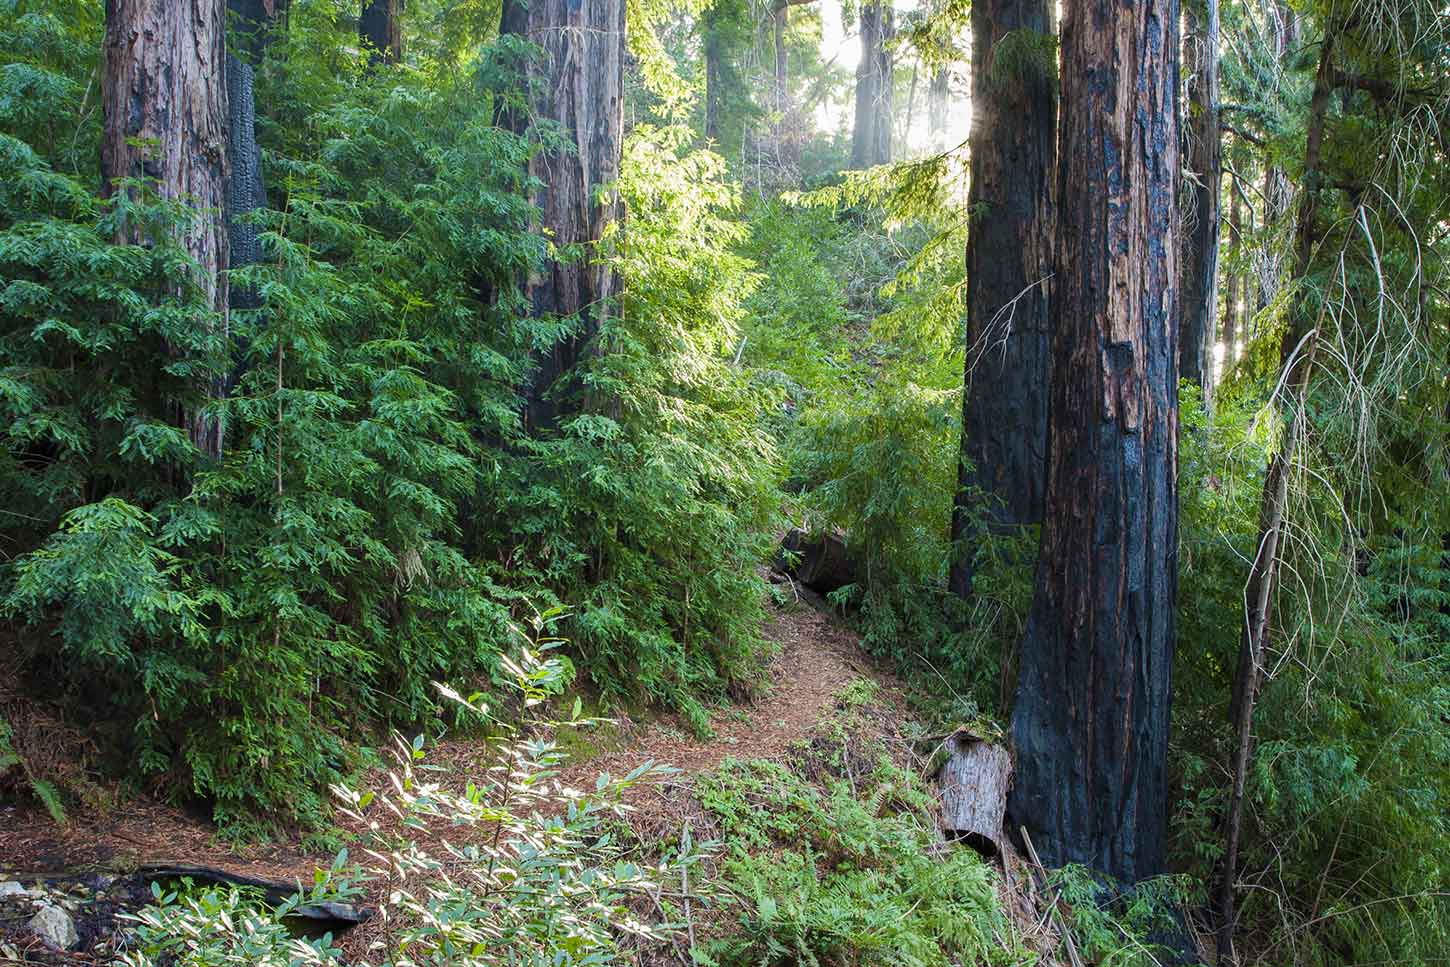 Redwoods along the Kirk Creek Trail in Los Padres National Forest, Big Sur